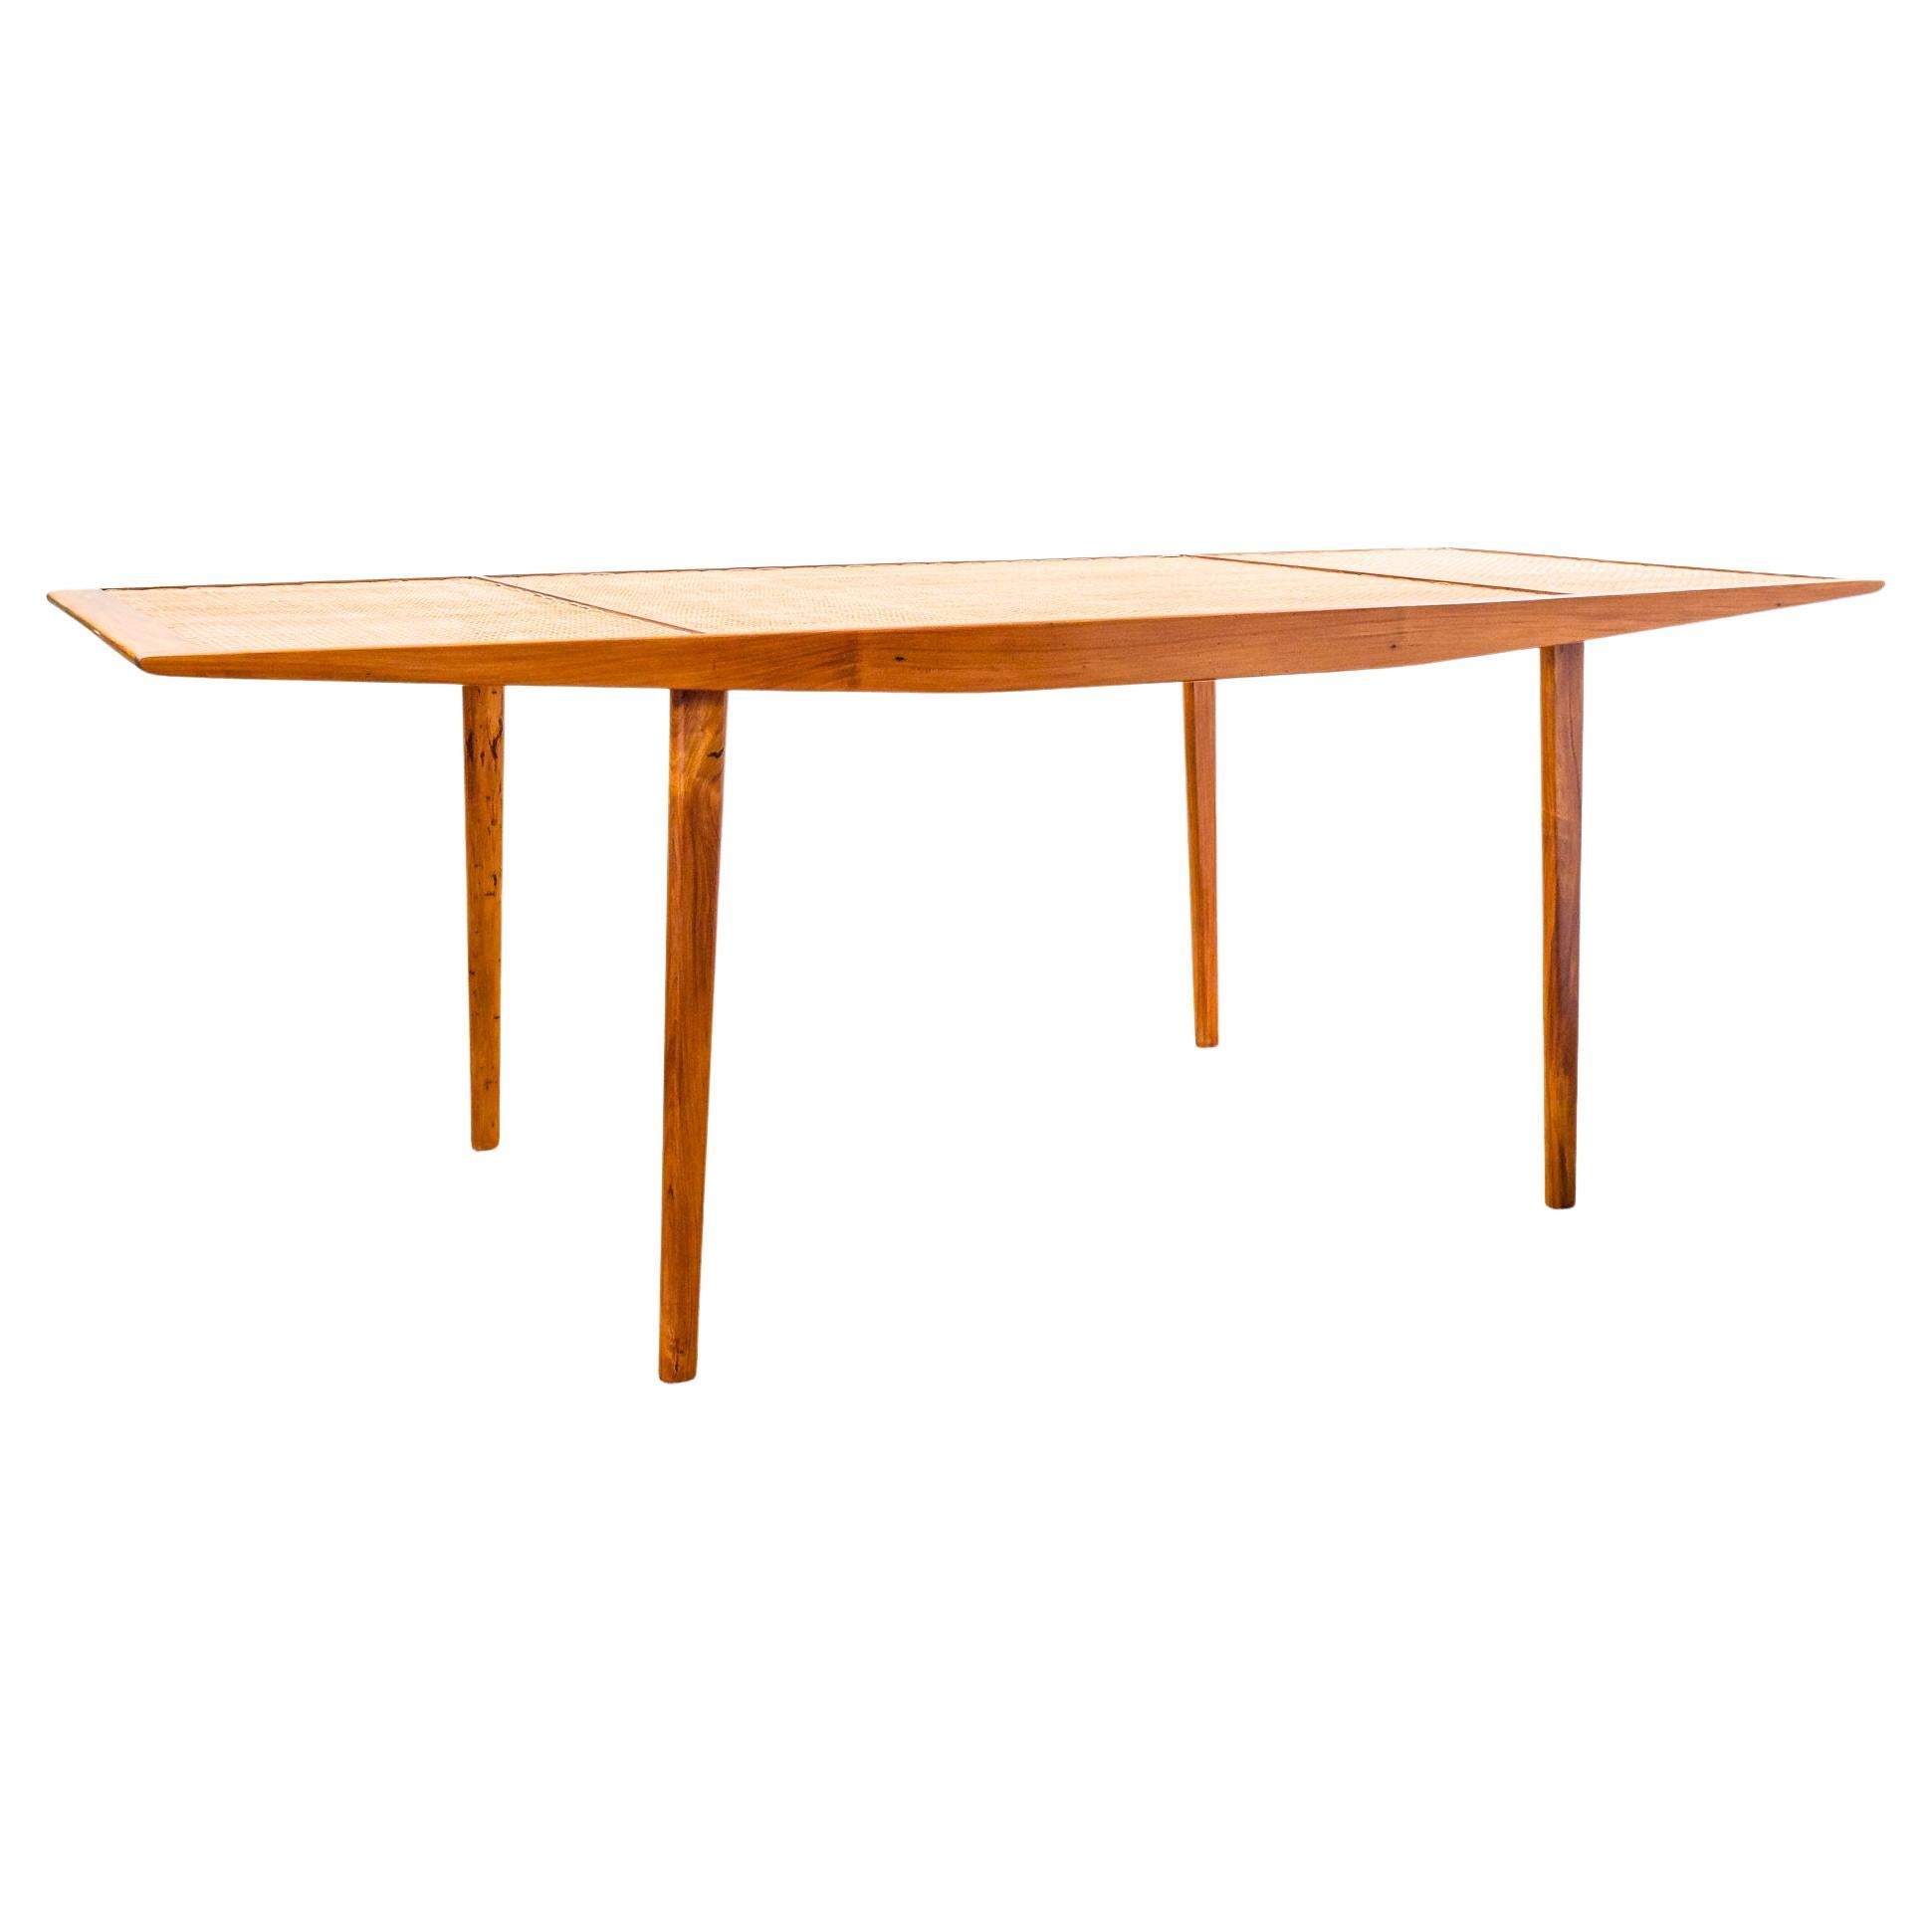 Dining Table in Caviuna and Cane Weaving by Martin Eisler, Brazil Modern, 1950s